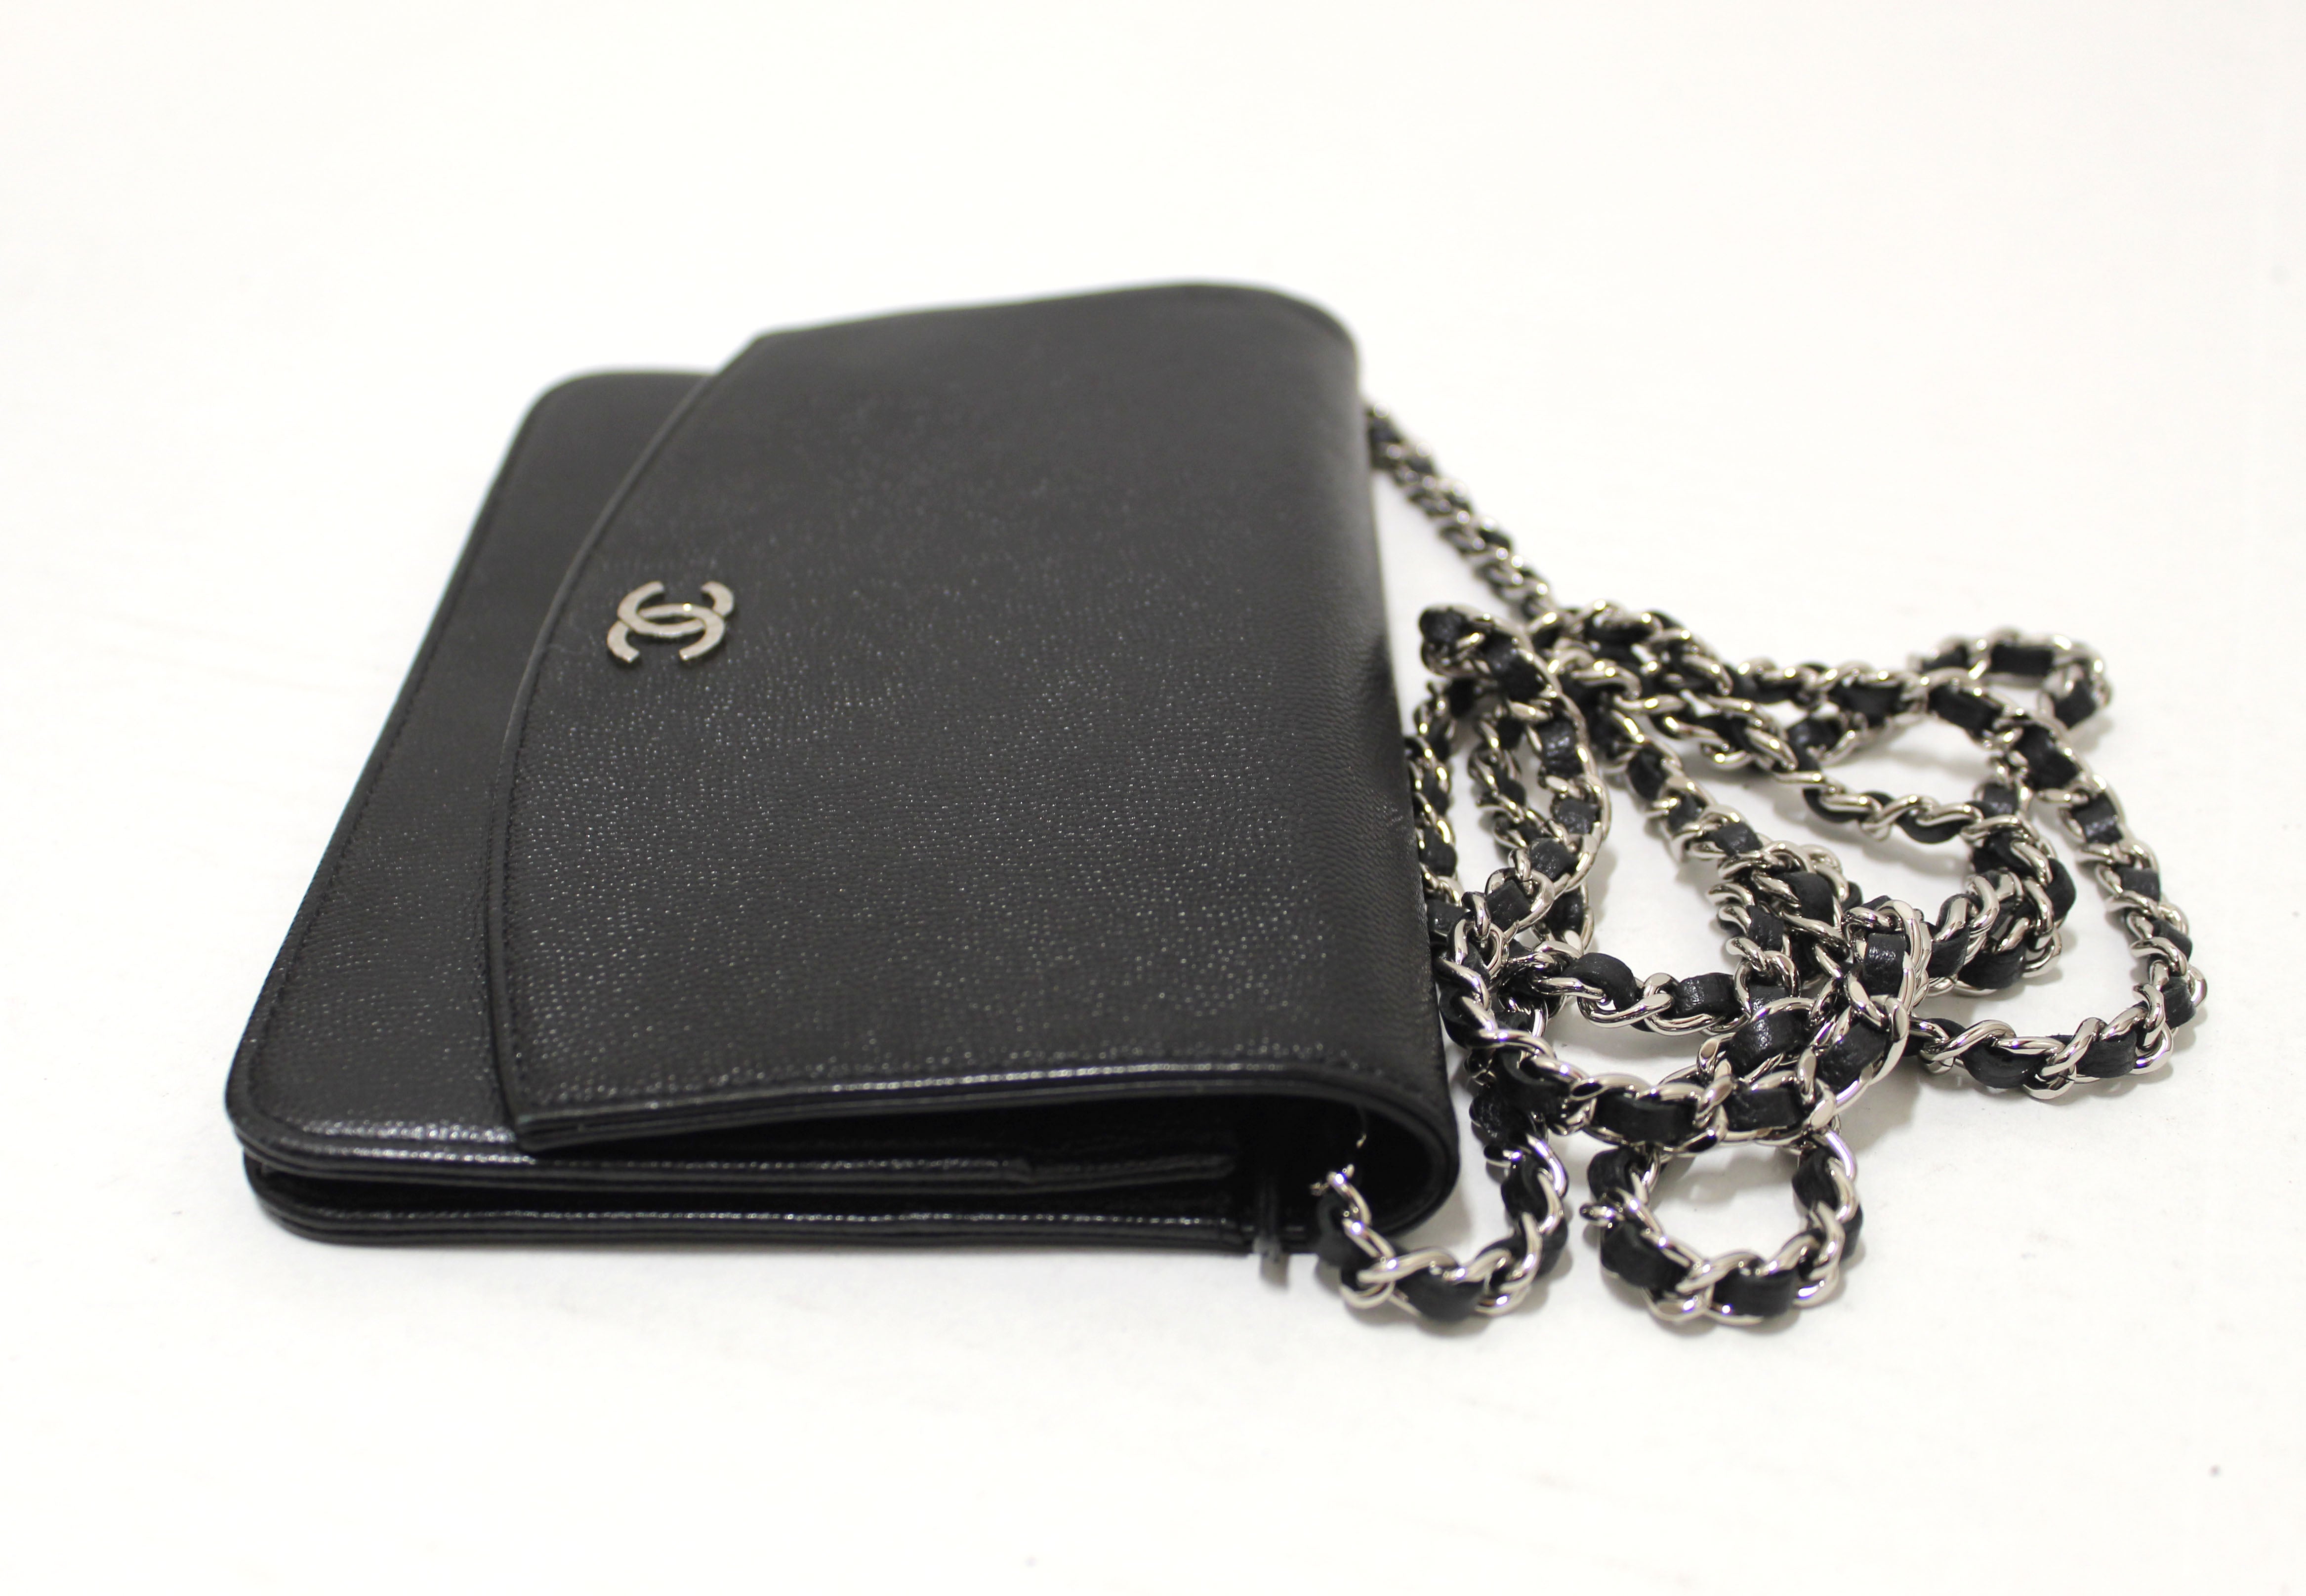 Authentic Chanel  Caviar Leather Wallet on Chain WOC Crossbody Clutch Bag